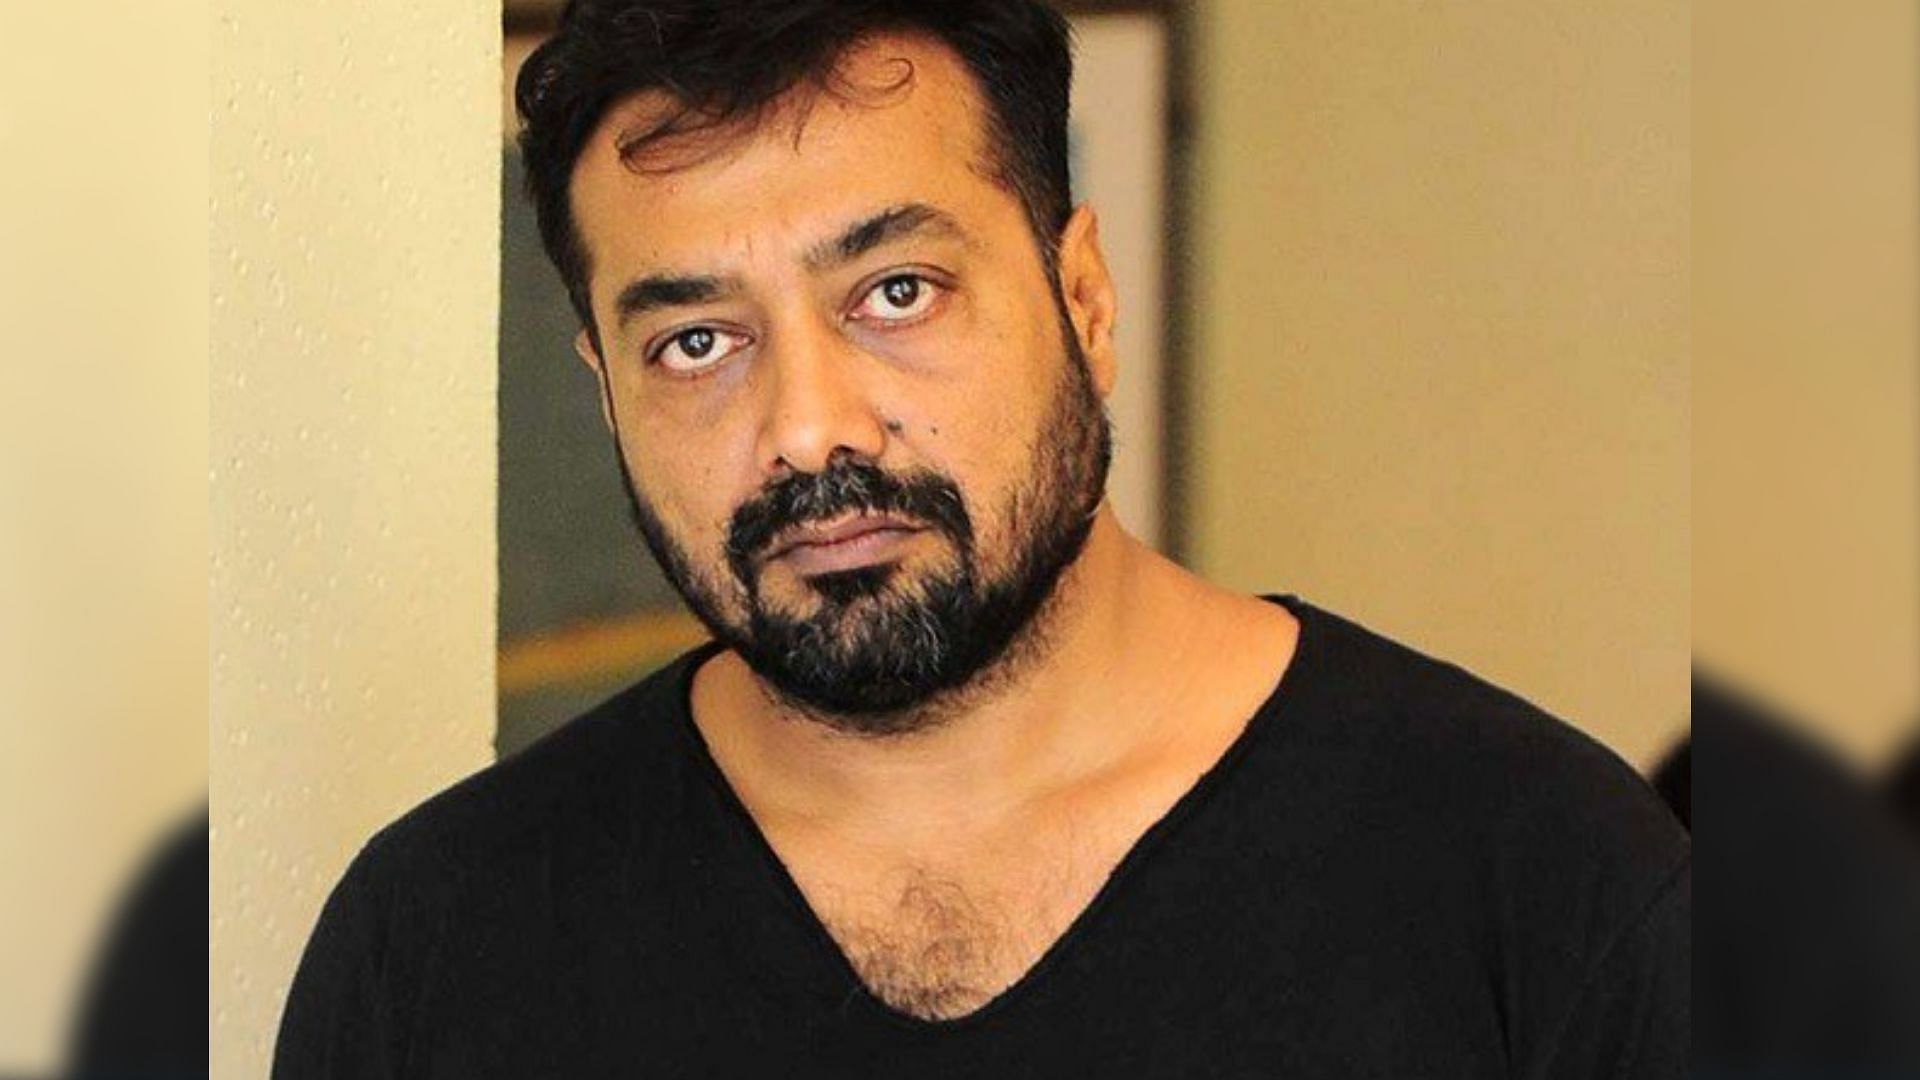 Anurag Kashyap’s daughter threatened with rape because he voiced his opinions against the PM.